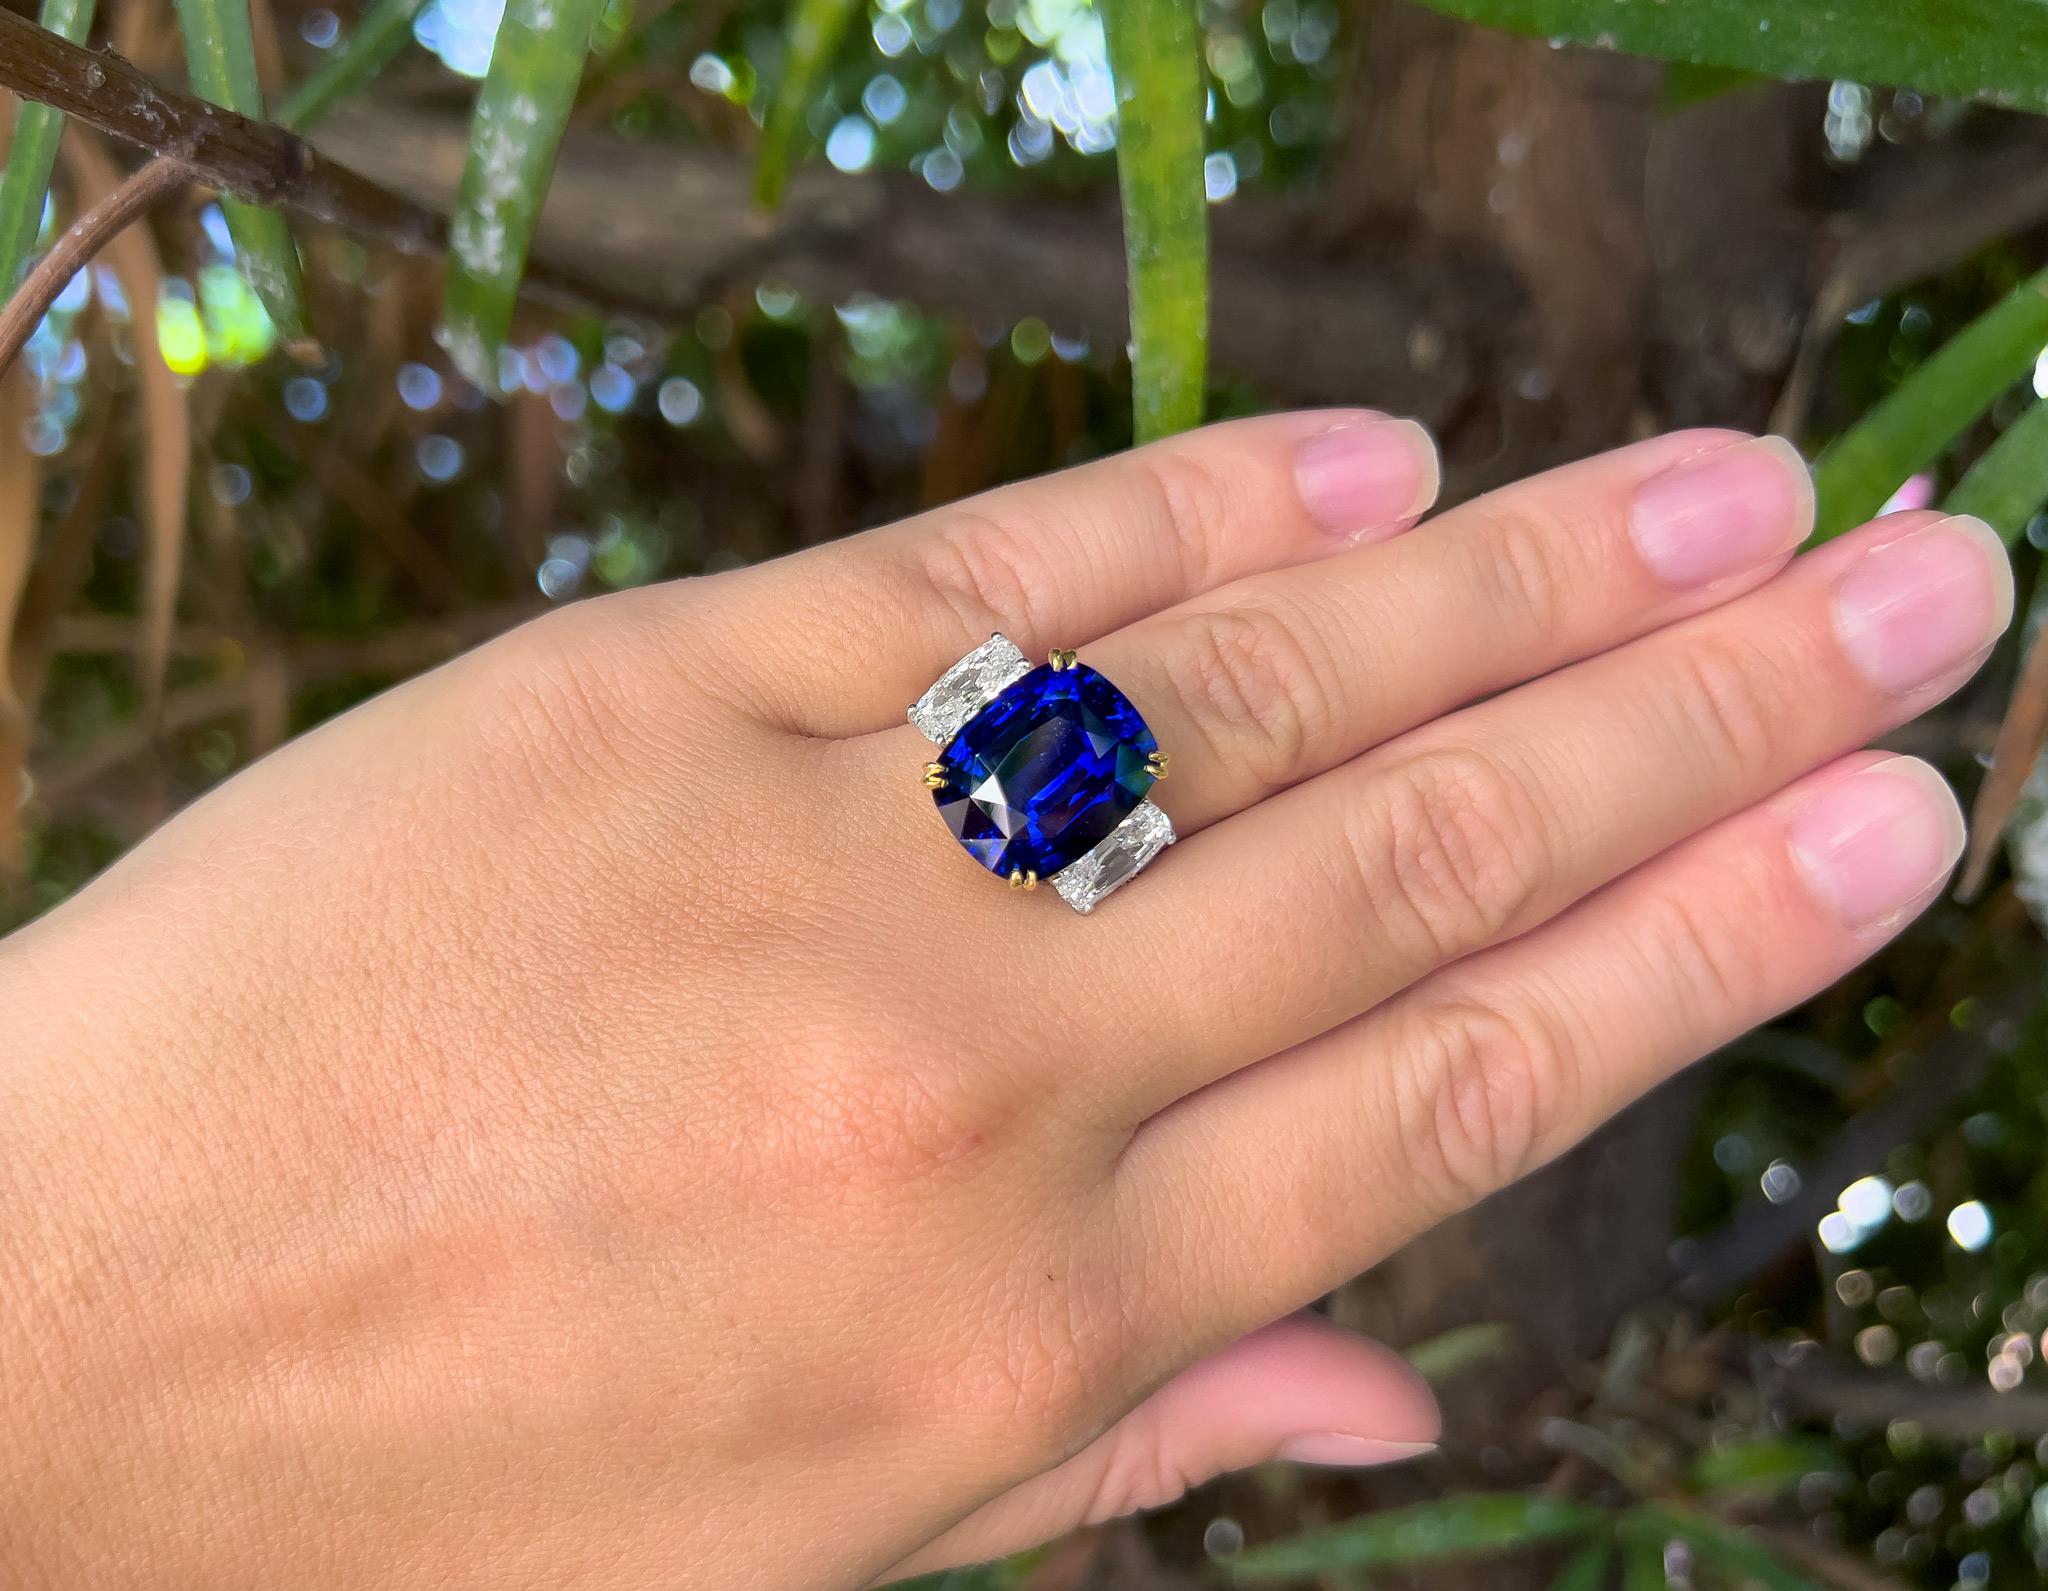 GIA Certified Sapphire = 15.02 Carat
Diamonds = 2.25 Carats
( Color: F, Clarity: VS )
Metal: Platinum, 18K Gold
Ring Size: 6.25 US
It can be resized complimentary